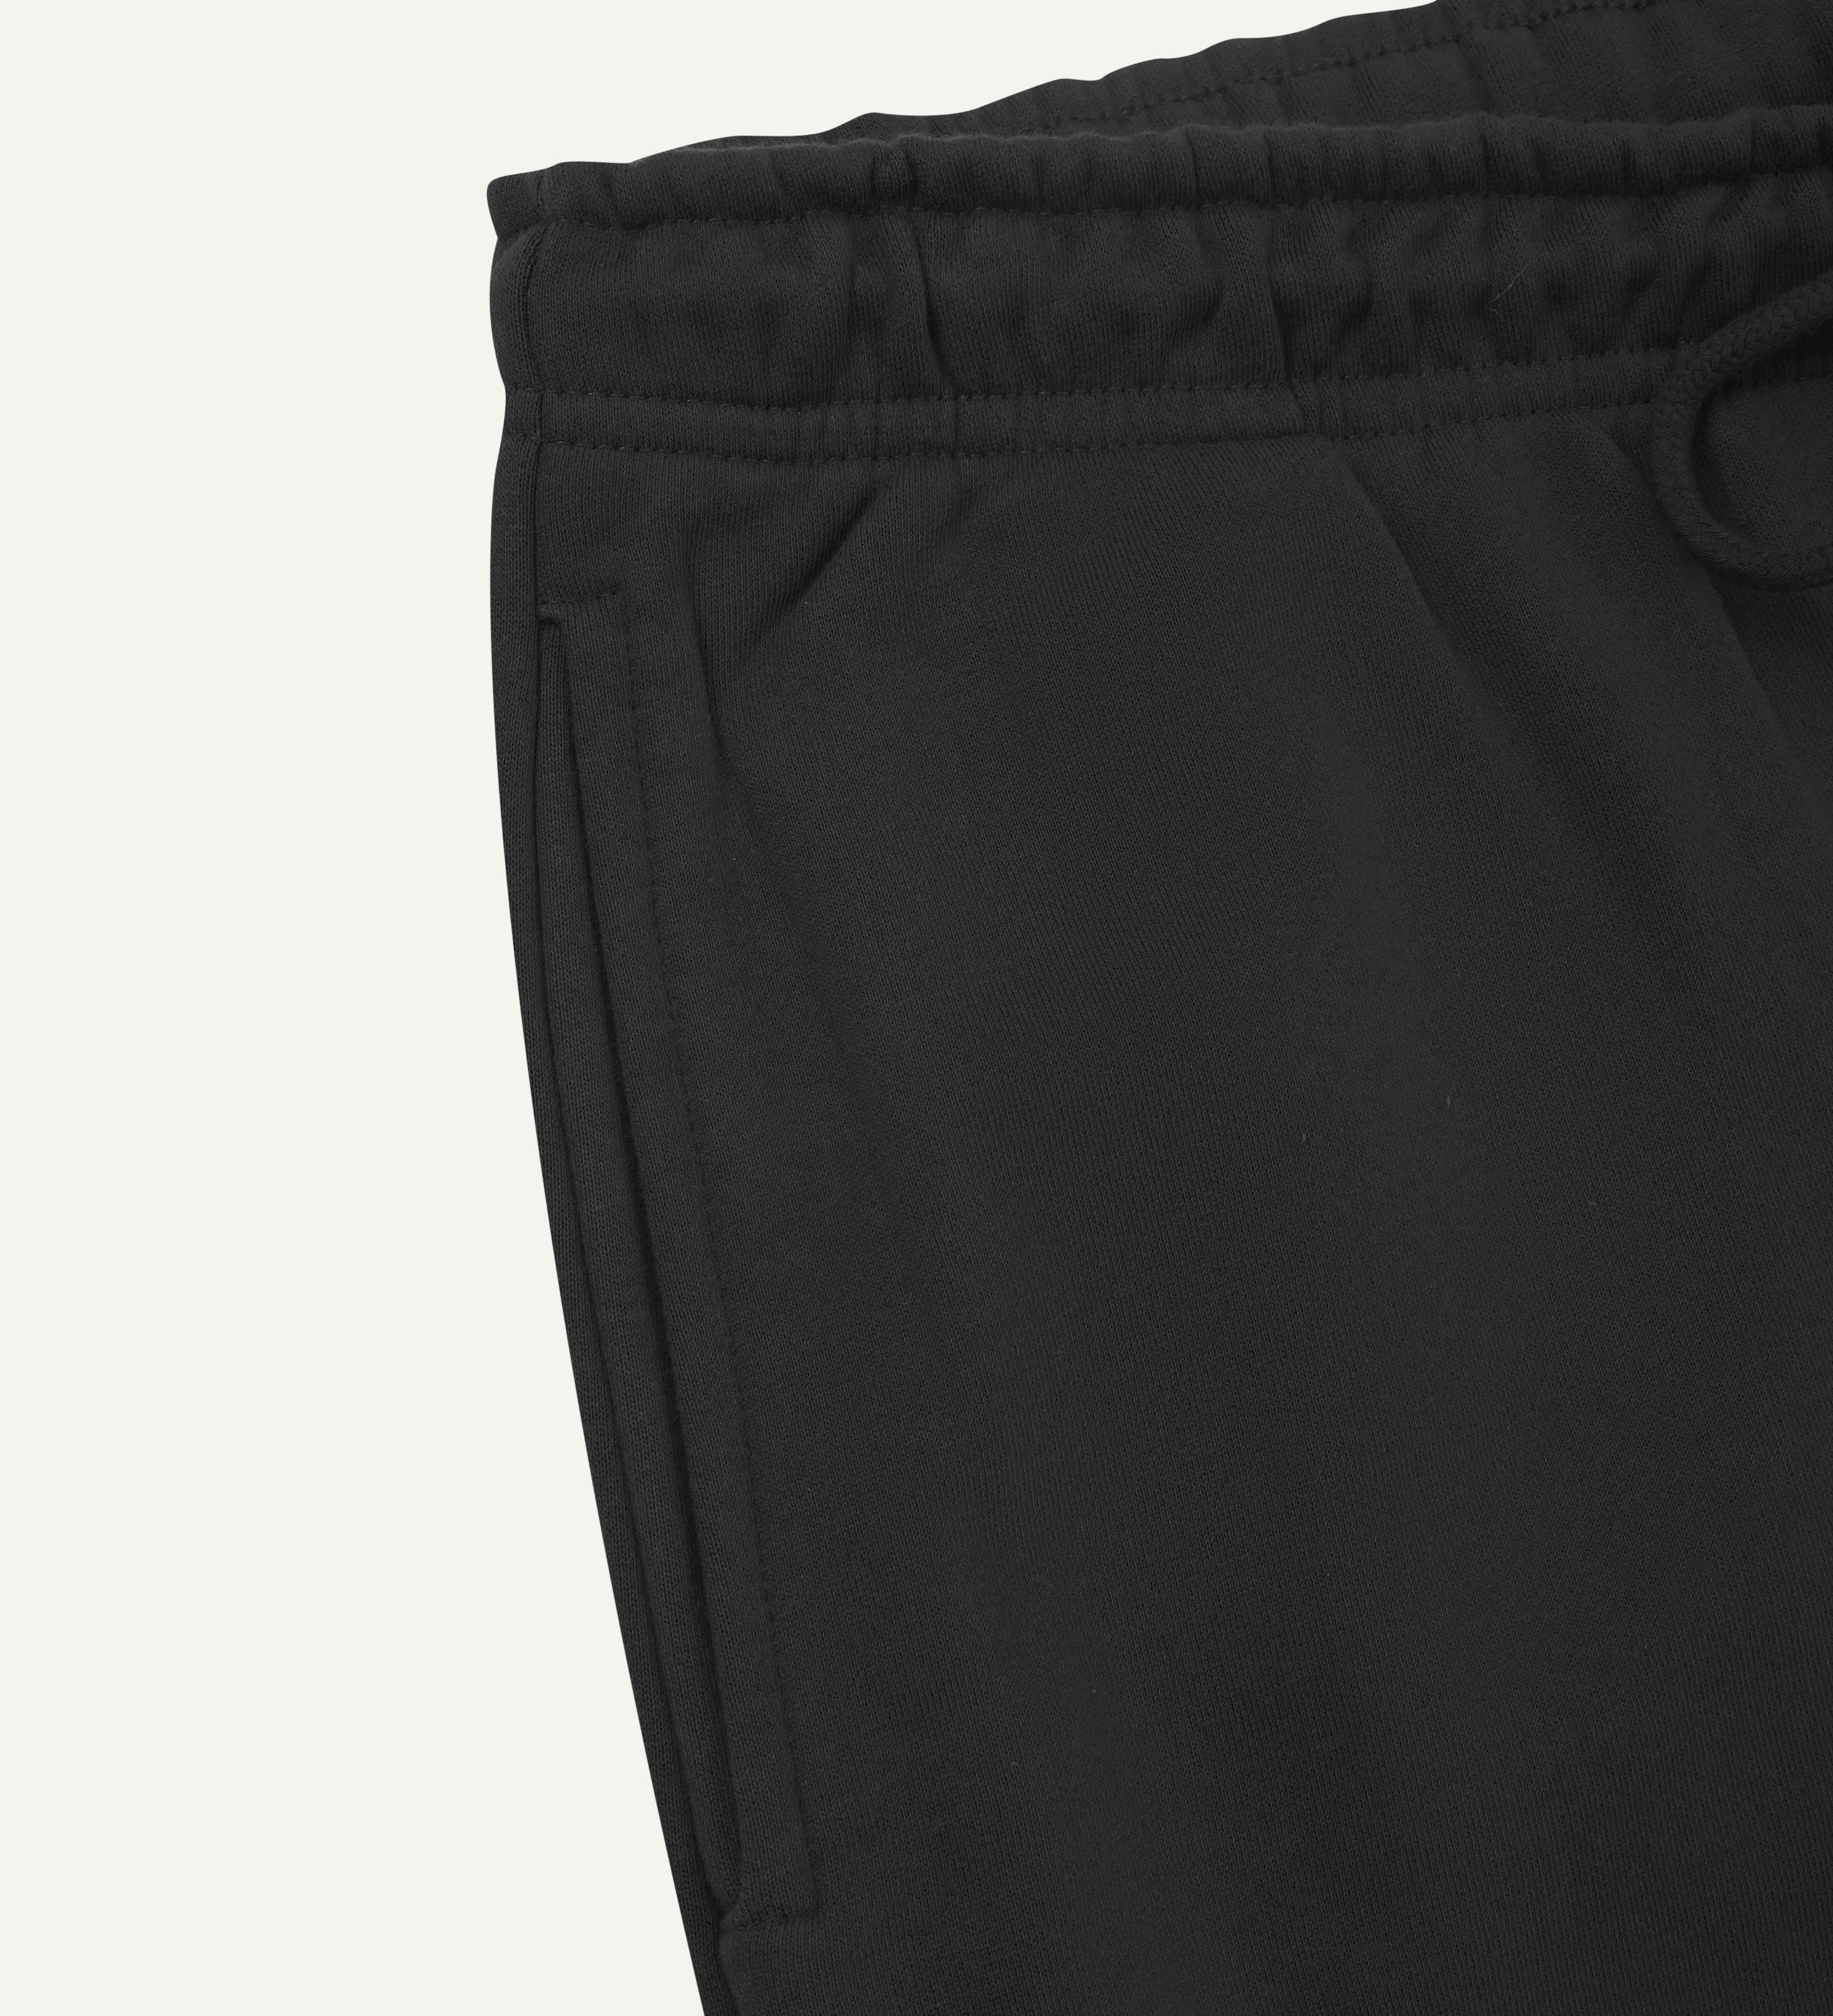 Front close-up view of dark grey organic cotton Jogging Pants for men by Uskees showing side pocket and drawstring waist detail.